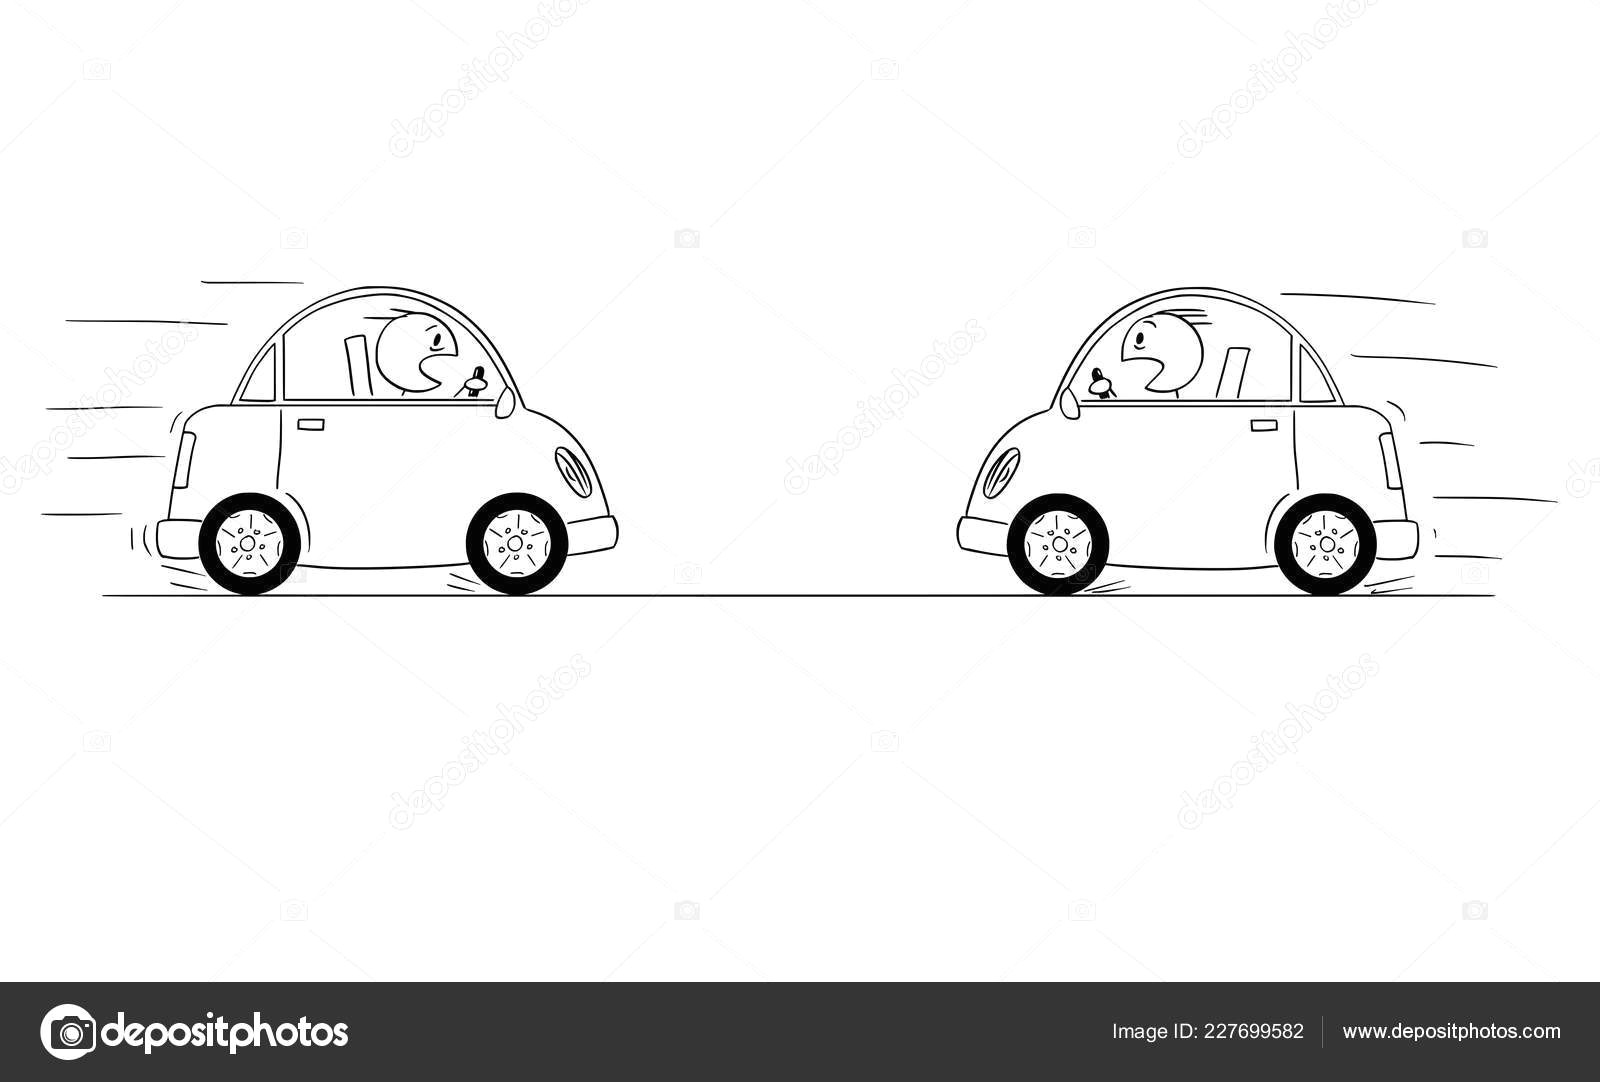 cartoon drawing od two cars driving against each other just moments before head on collision crash accident stock illustration